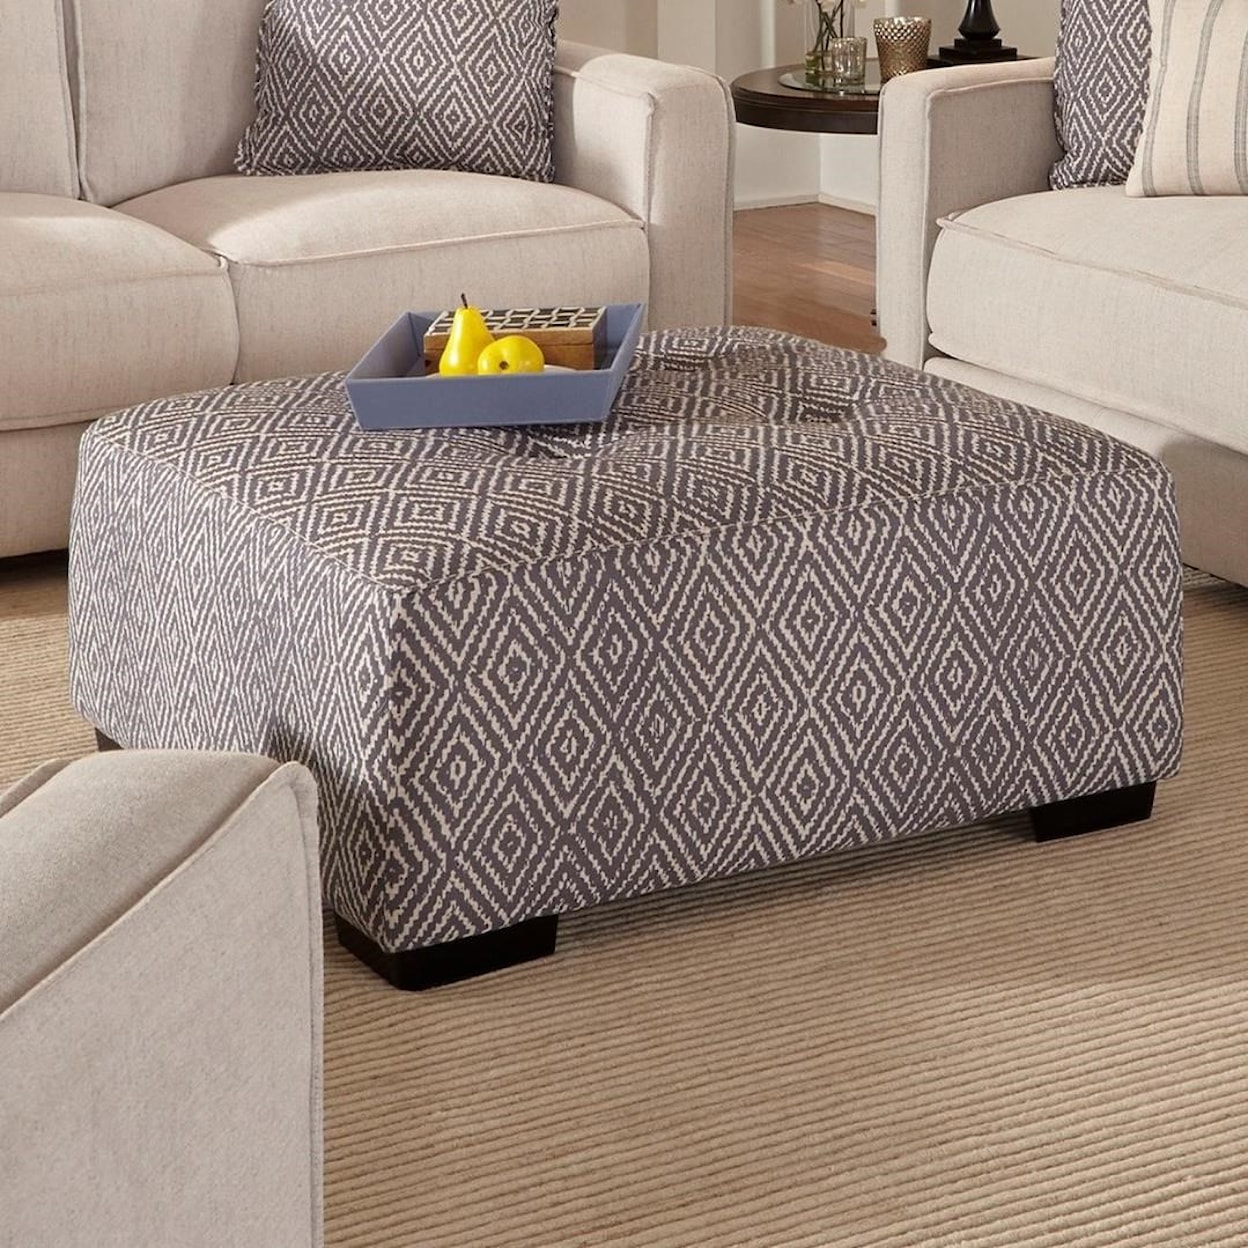 Franklin Landon Square Ottoman with Button Tufting